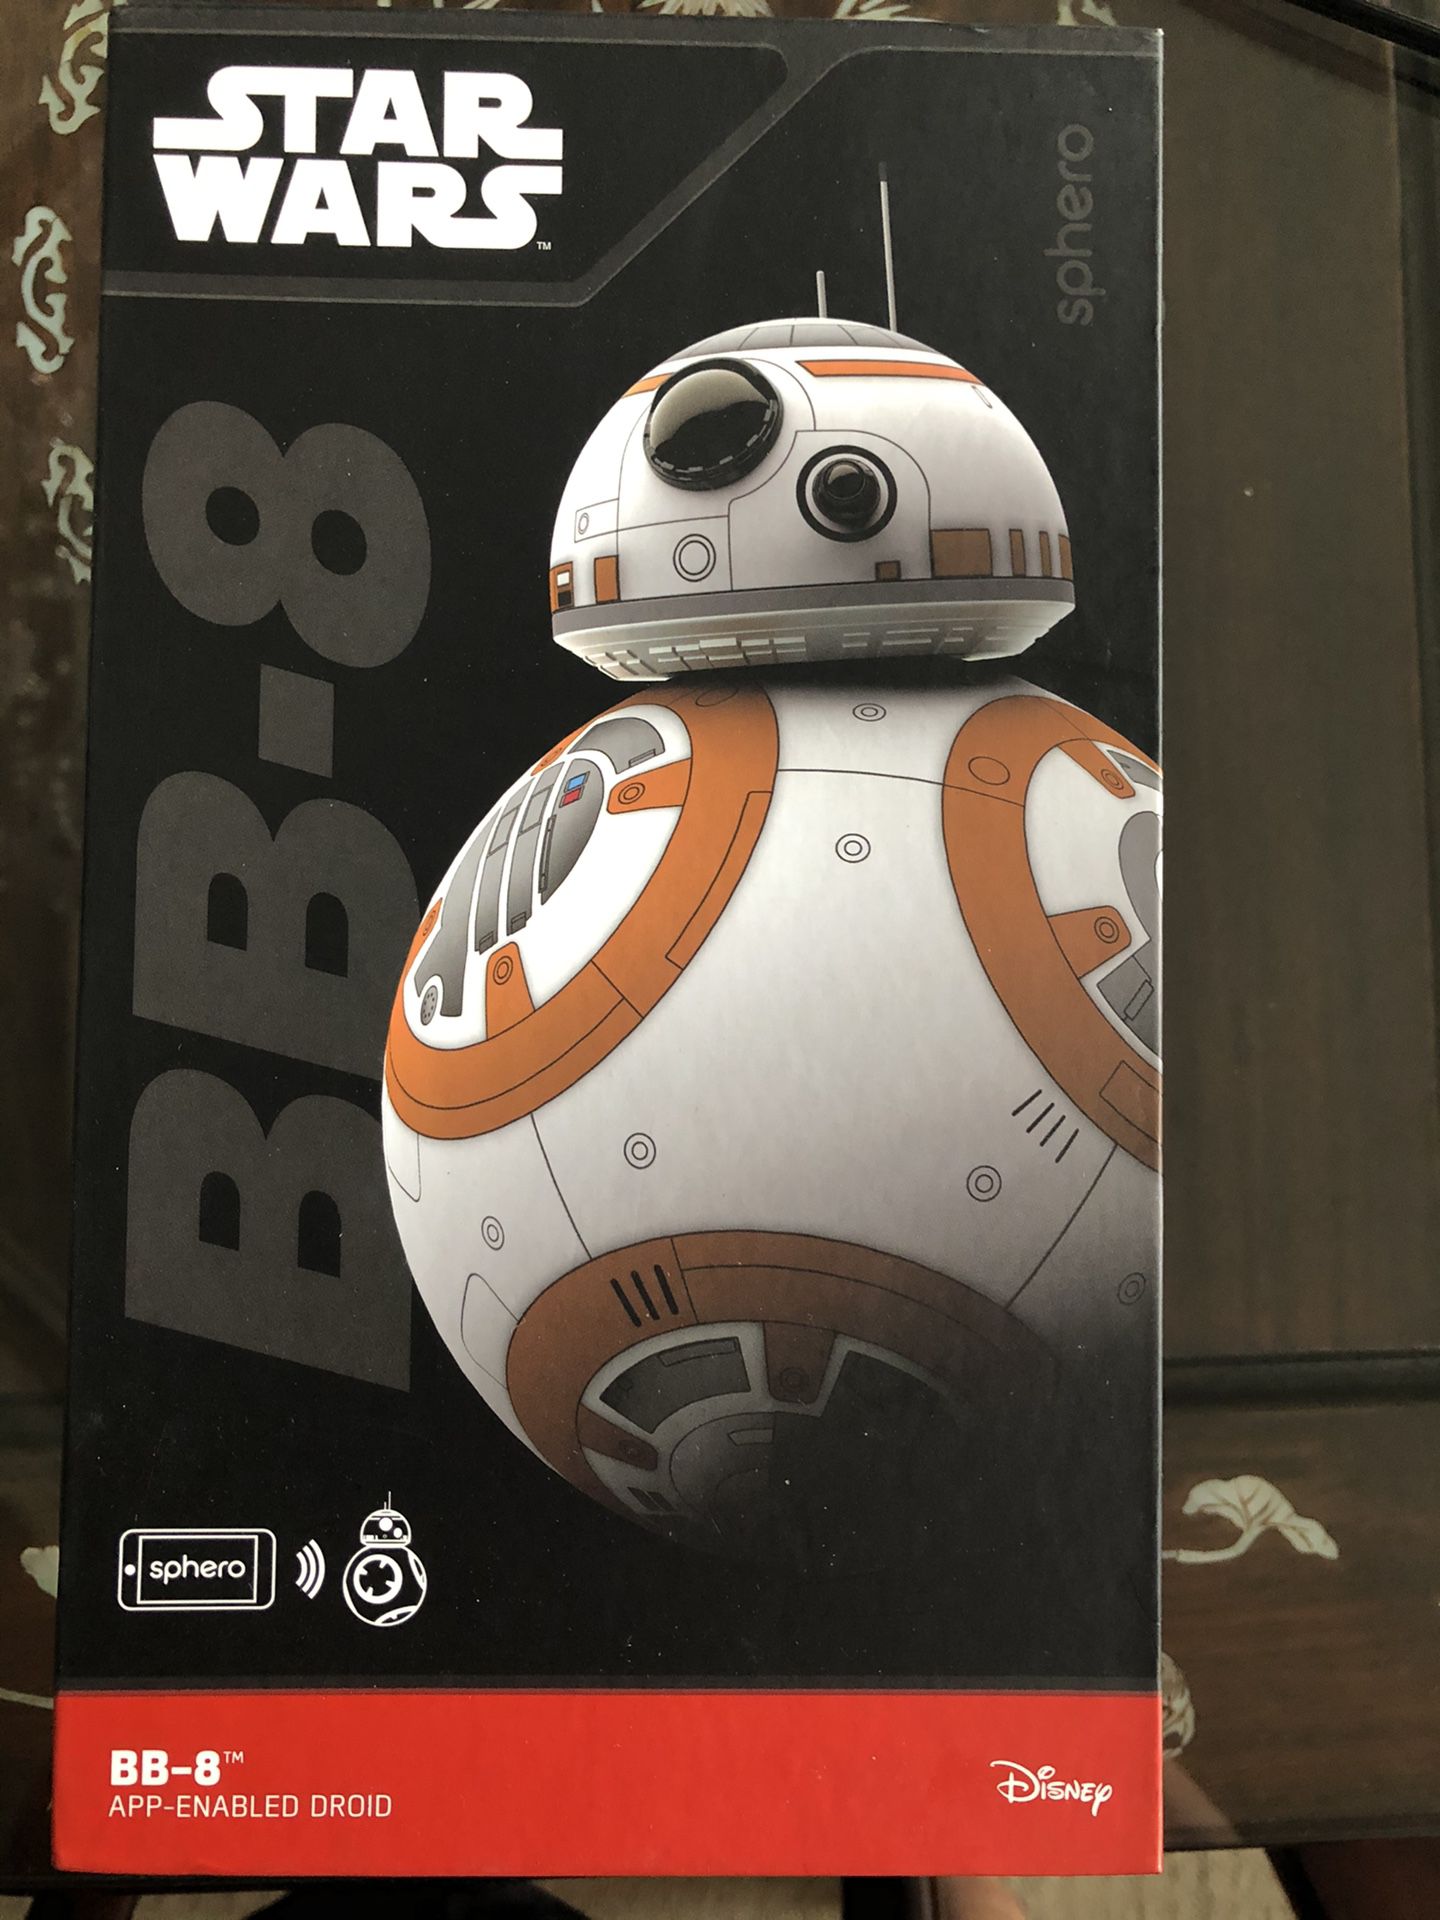 Star Wars collectible: BB-8 droid by Sphero